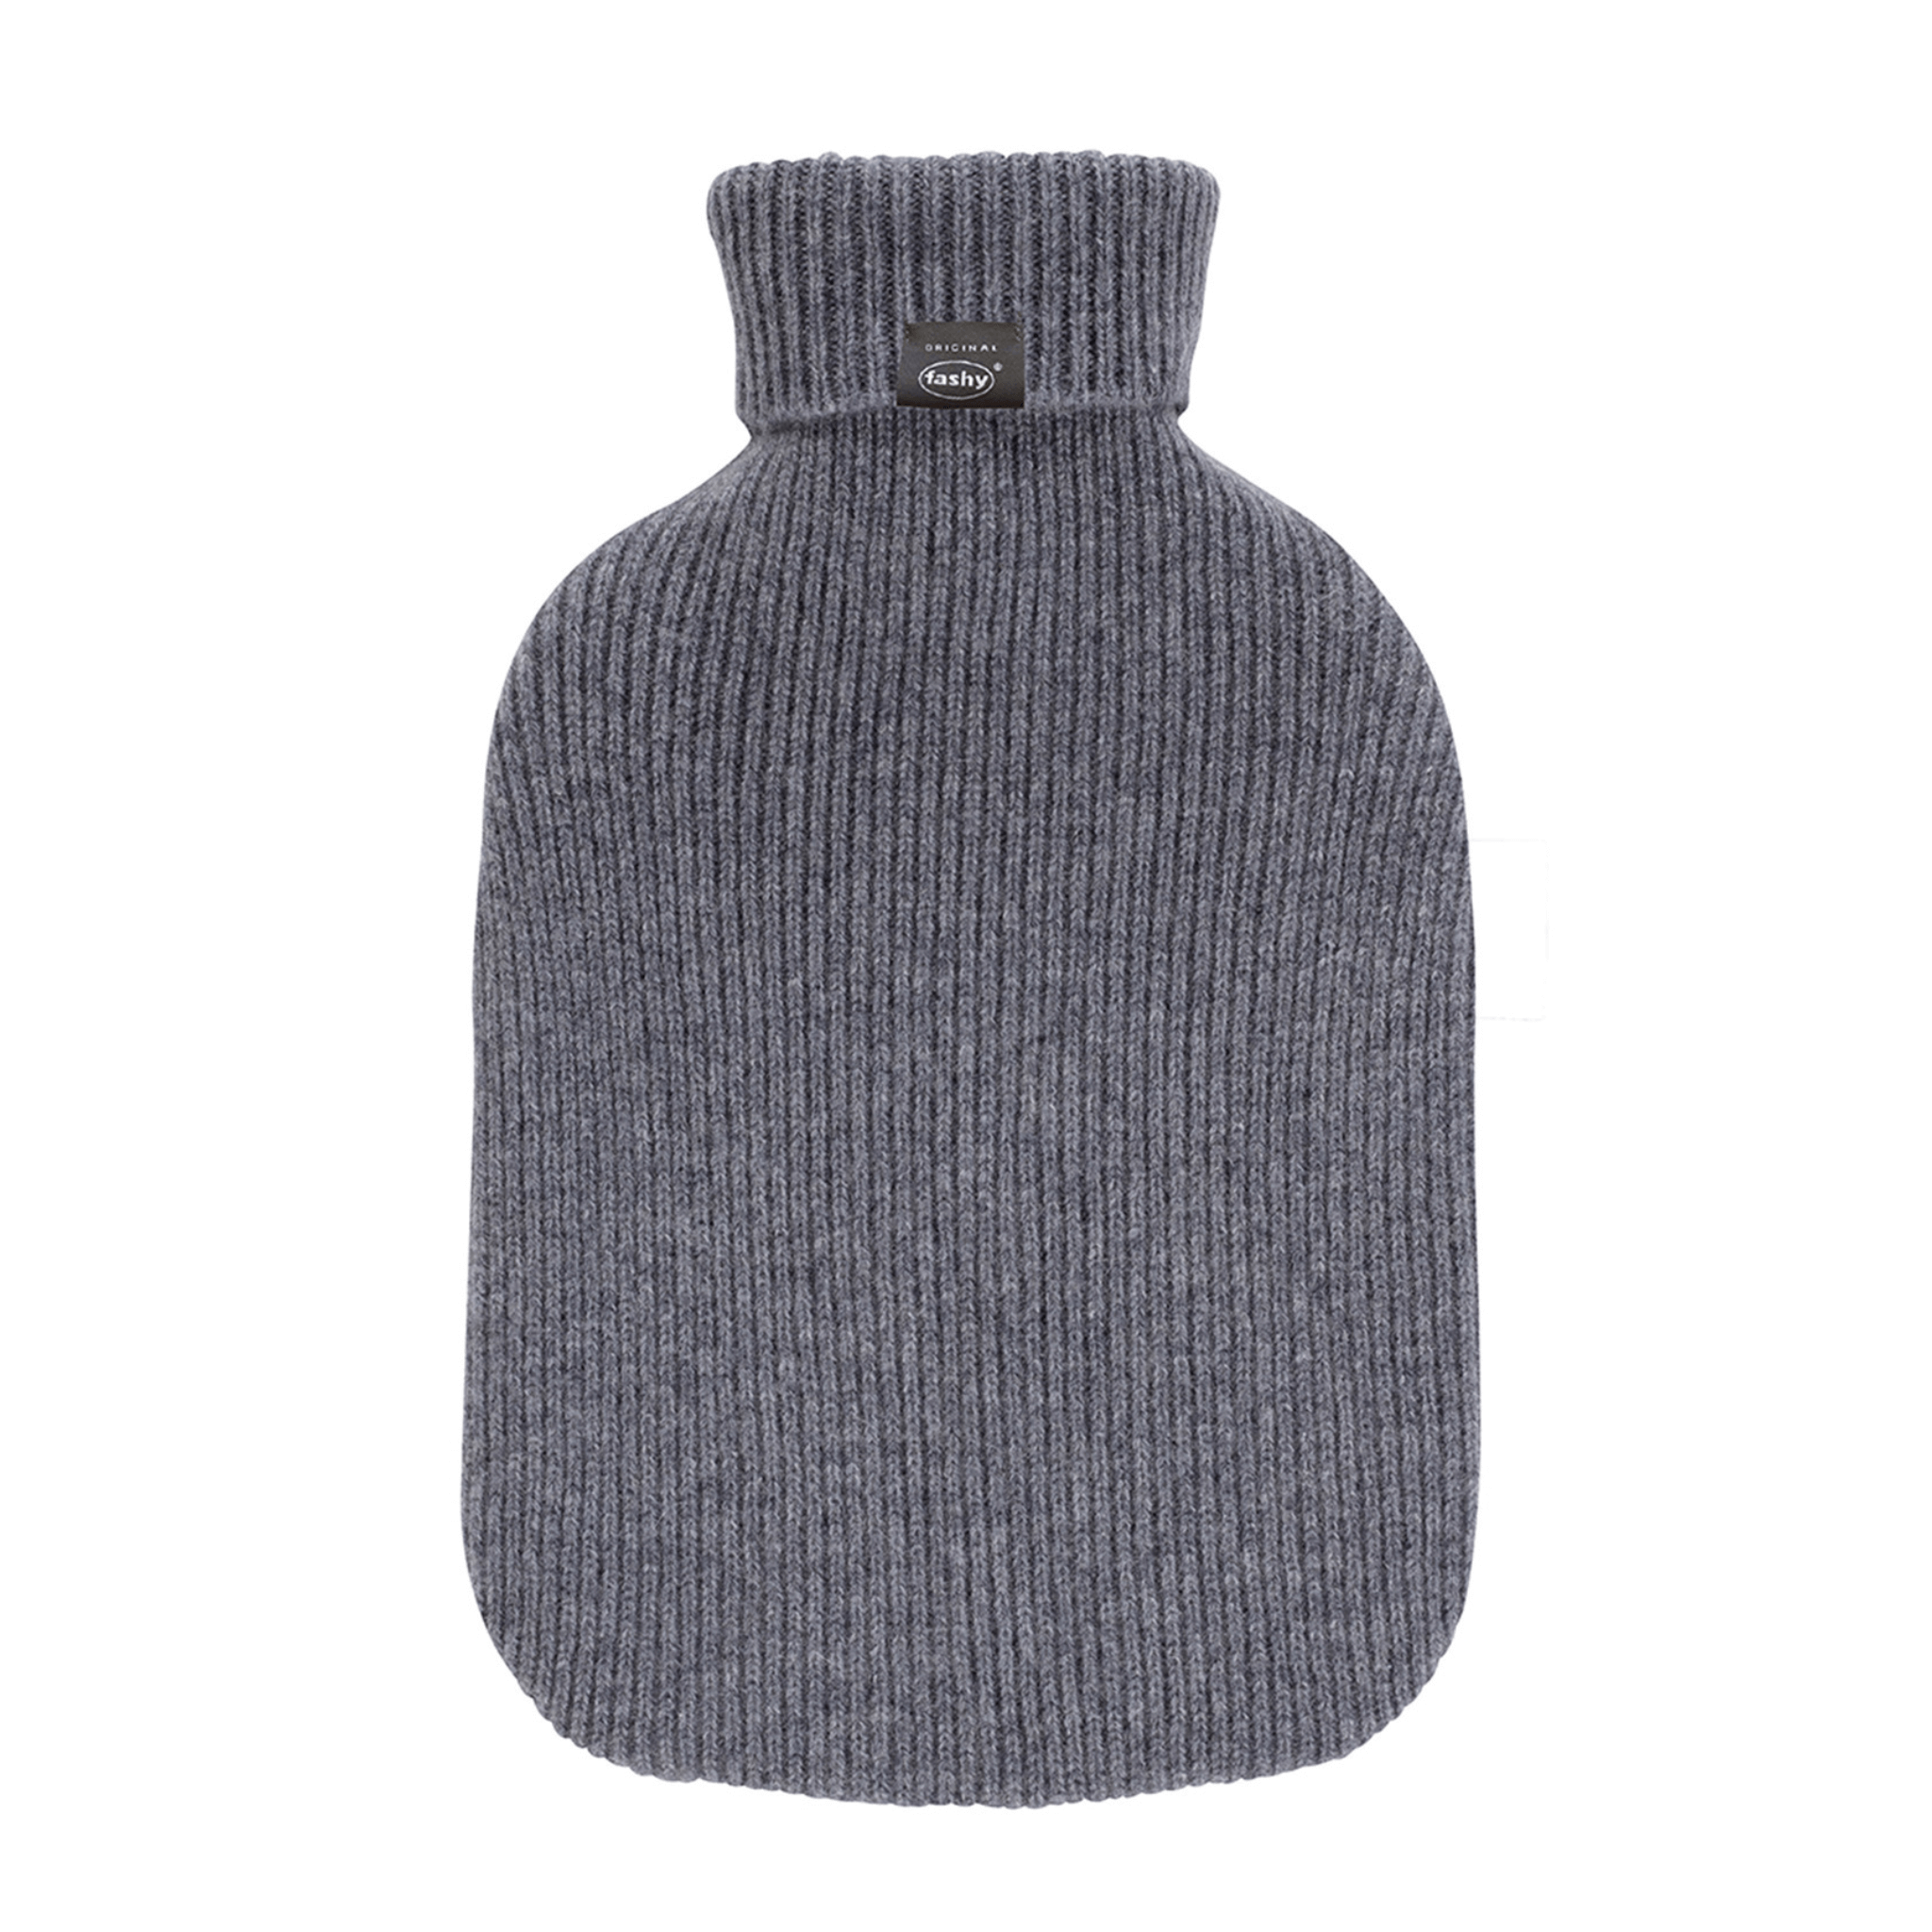 2 Litre Fashy Hot Water Bottle with Grey Turtleneck Knit Cashmere Cover